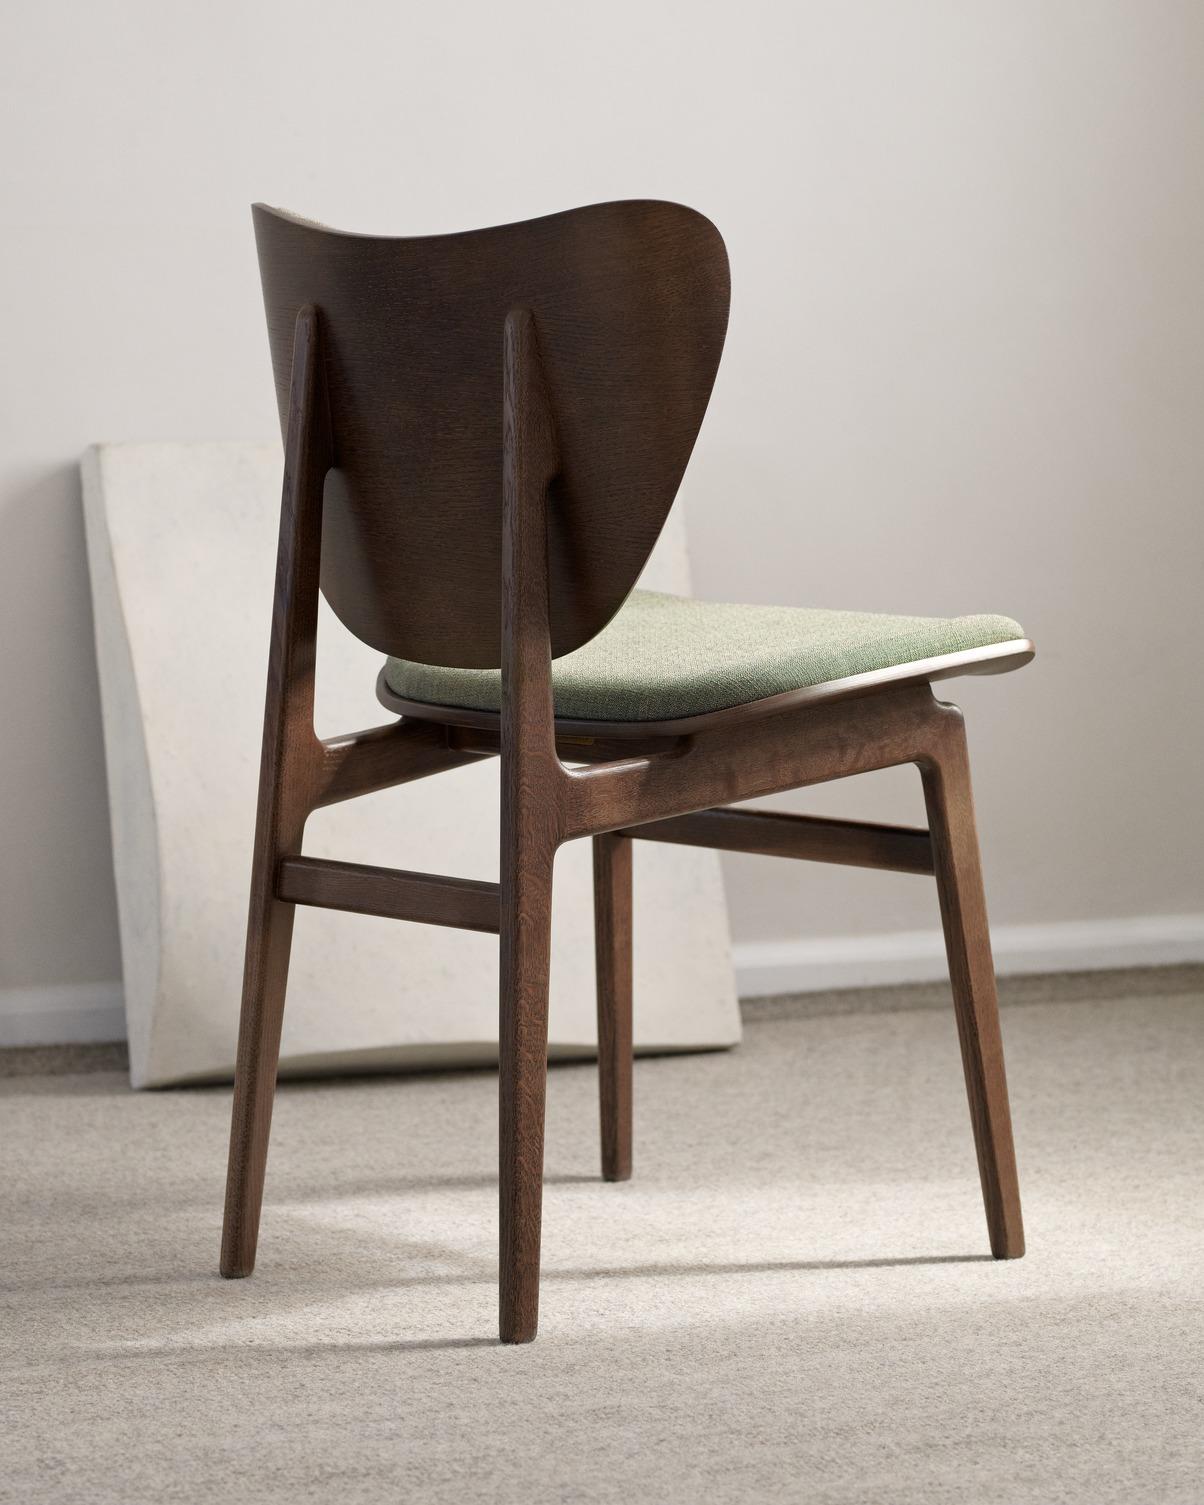 'Elephant' Dining Chair by Norr11, Natural Oak, Leather Camel For Sale 2